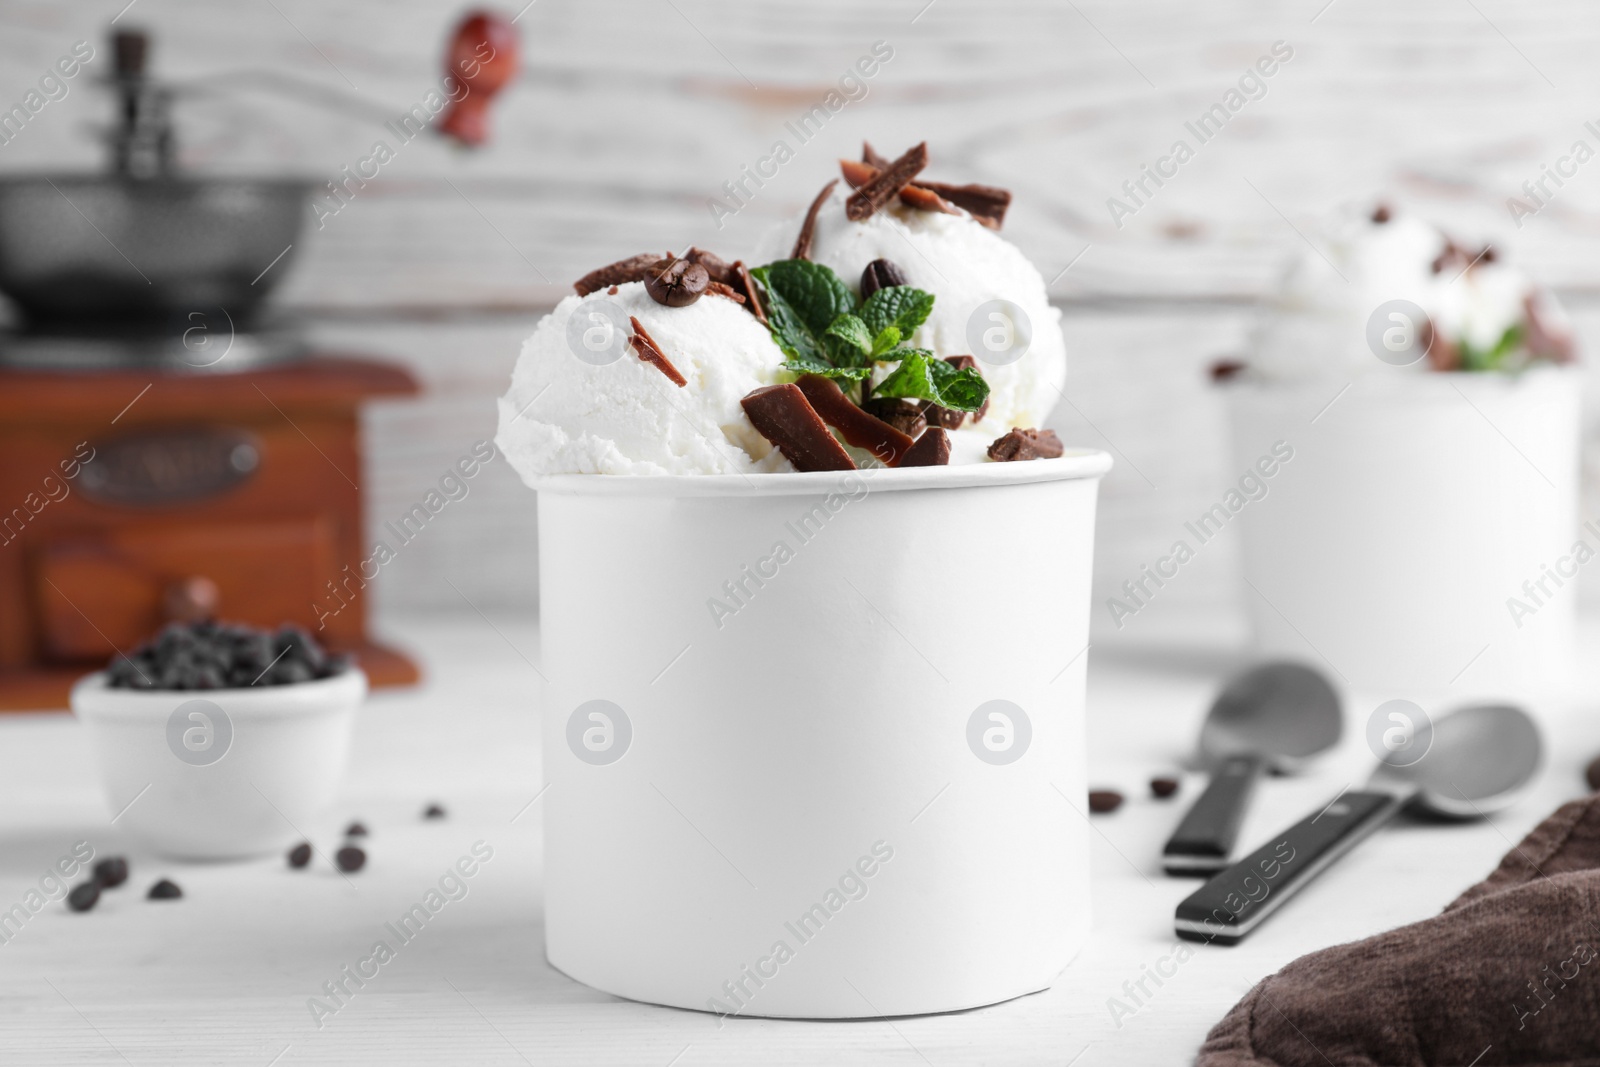 Photo of Yummy ice cream with chocolate served on white table